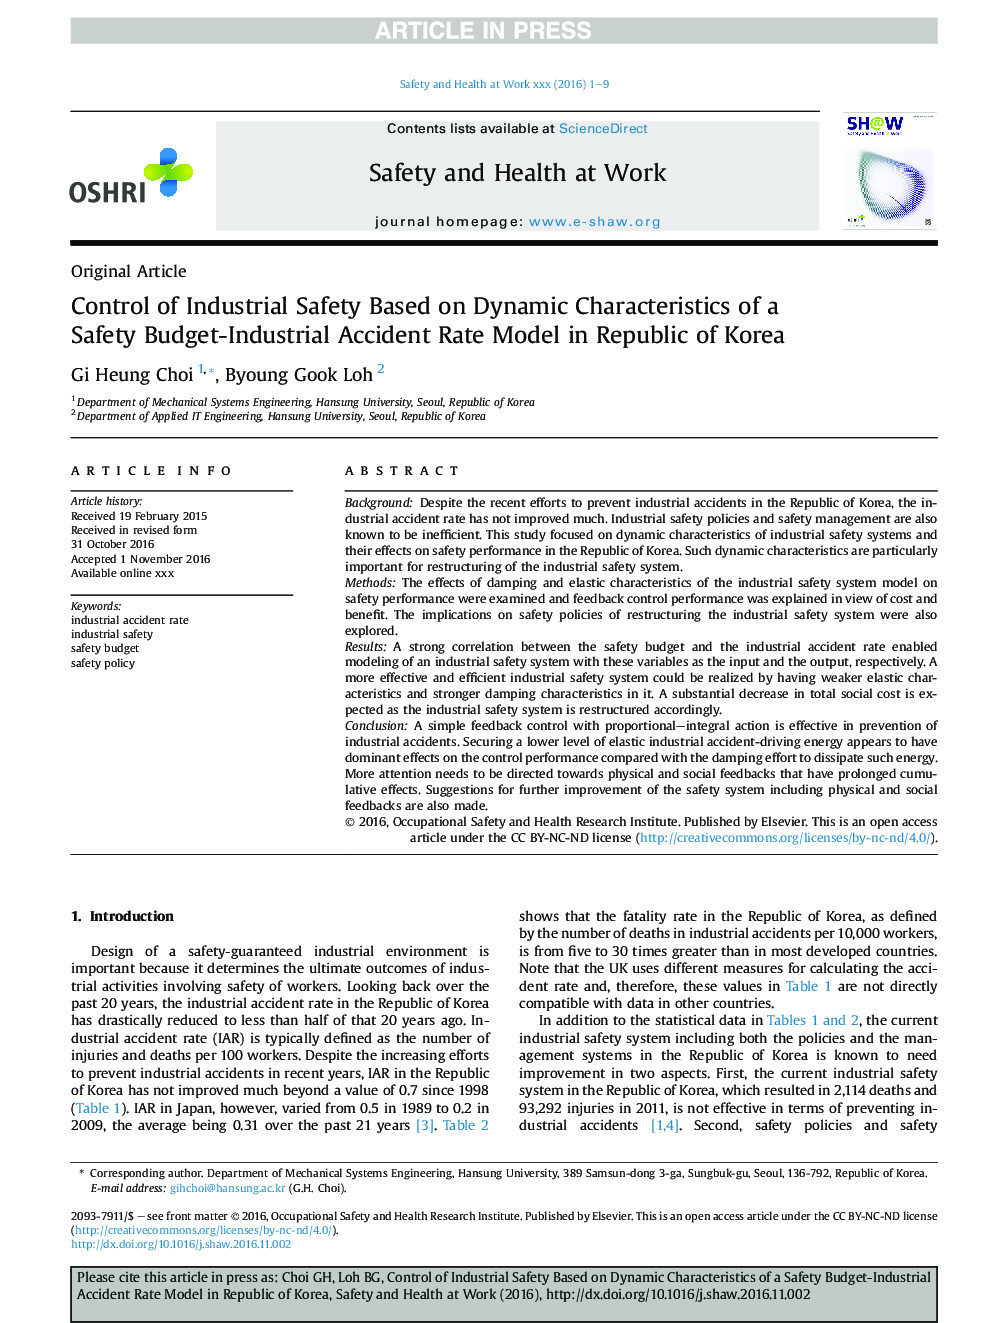 Control of Industrial Safety Based on Dynamic Characteristics ofÂ a Safety Budget-Industrial Accident Rate Model in Republic of Korea